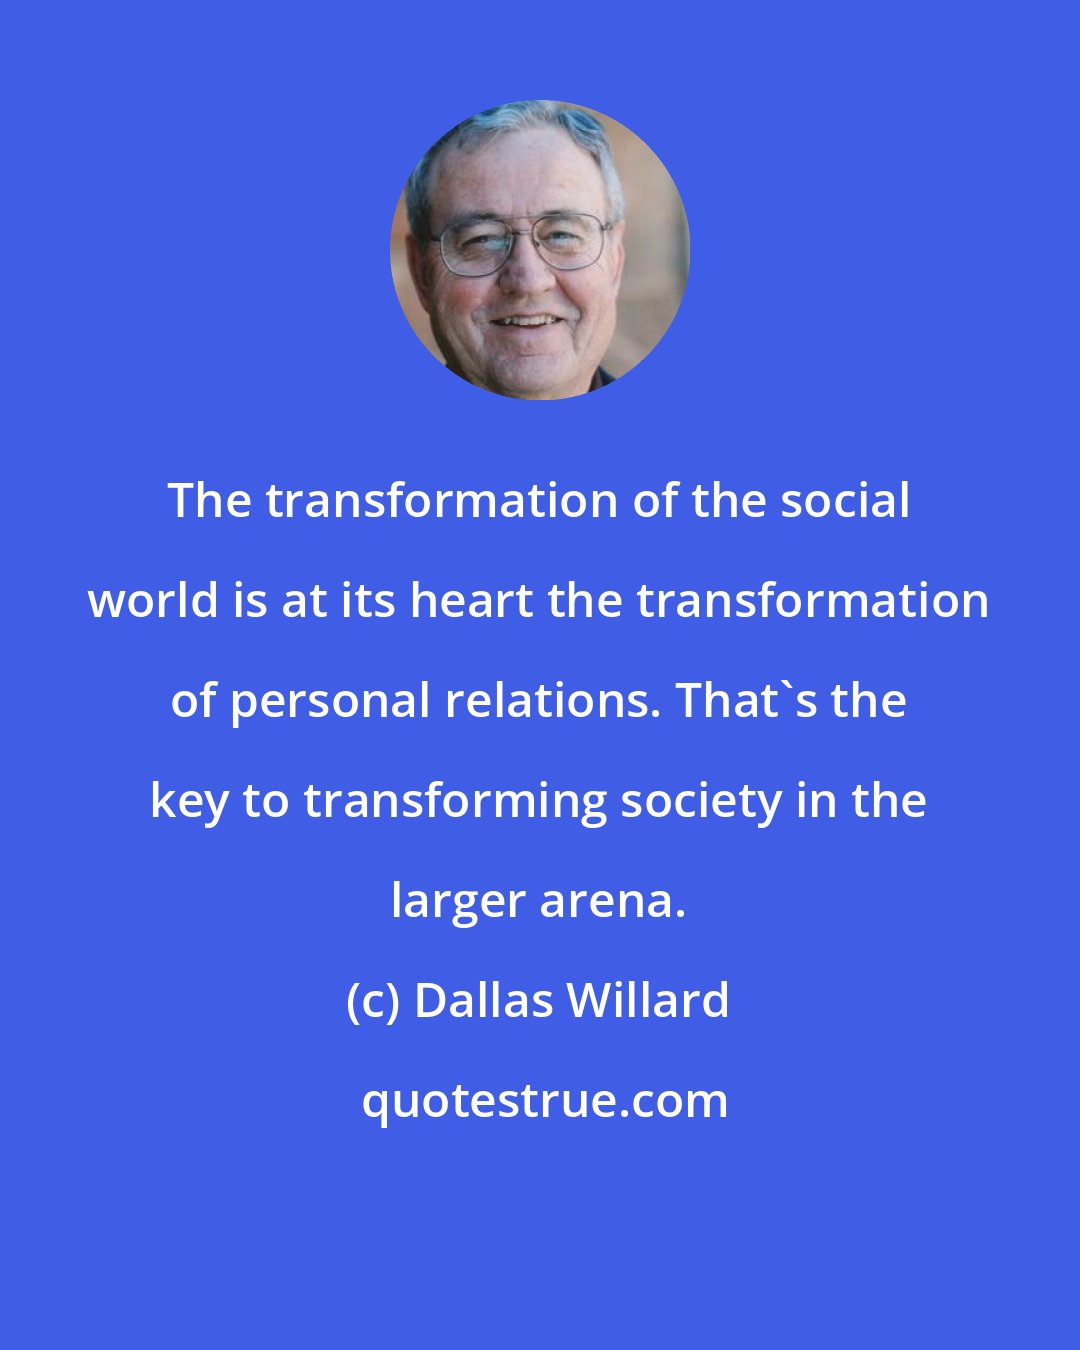 Dallas Willard: The transformation of the social world is at its heart the transformation of personal relations. That's the key to transforming society in the larger arena.